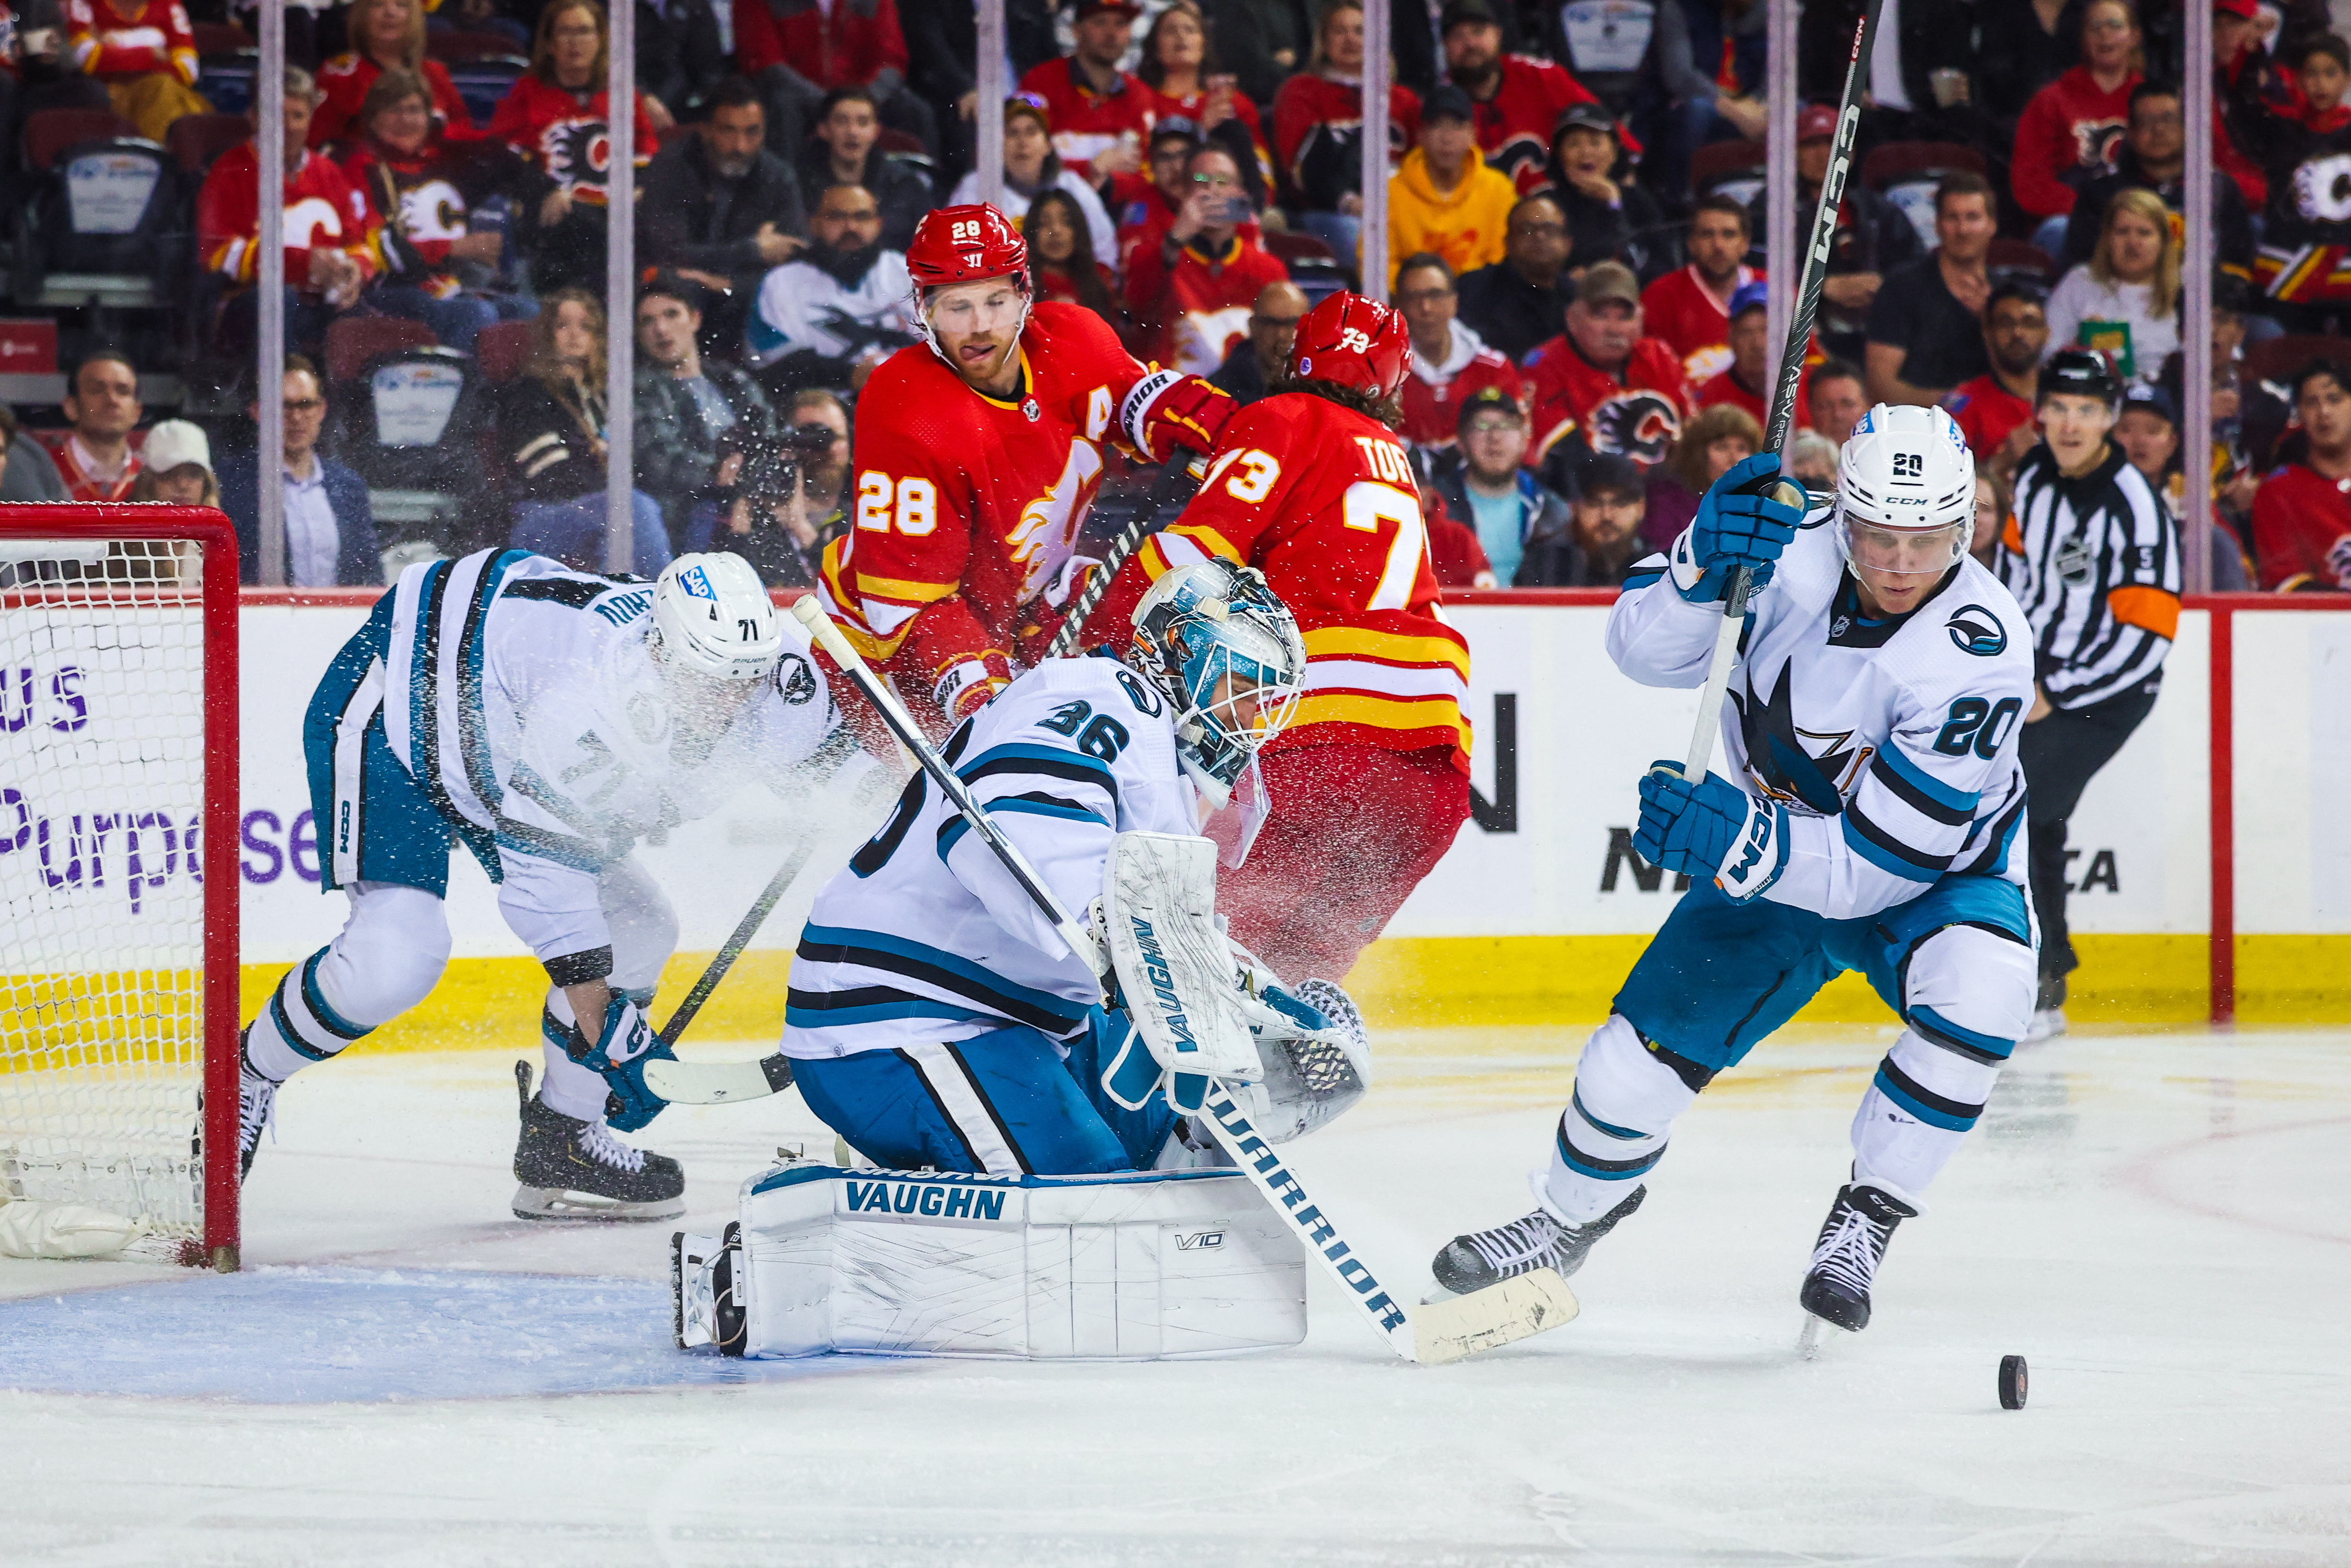 Zadorov has hat trick, Flames beat Sharks 3-1 in finale - ABC7 San